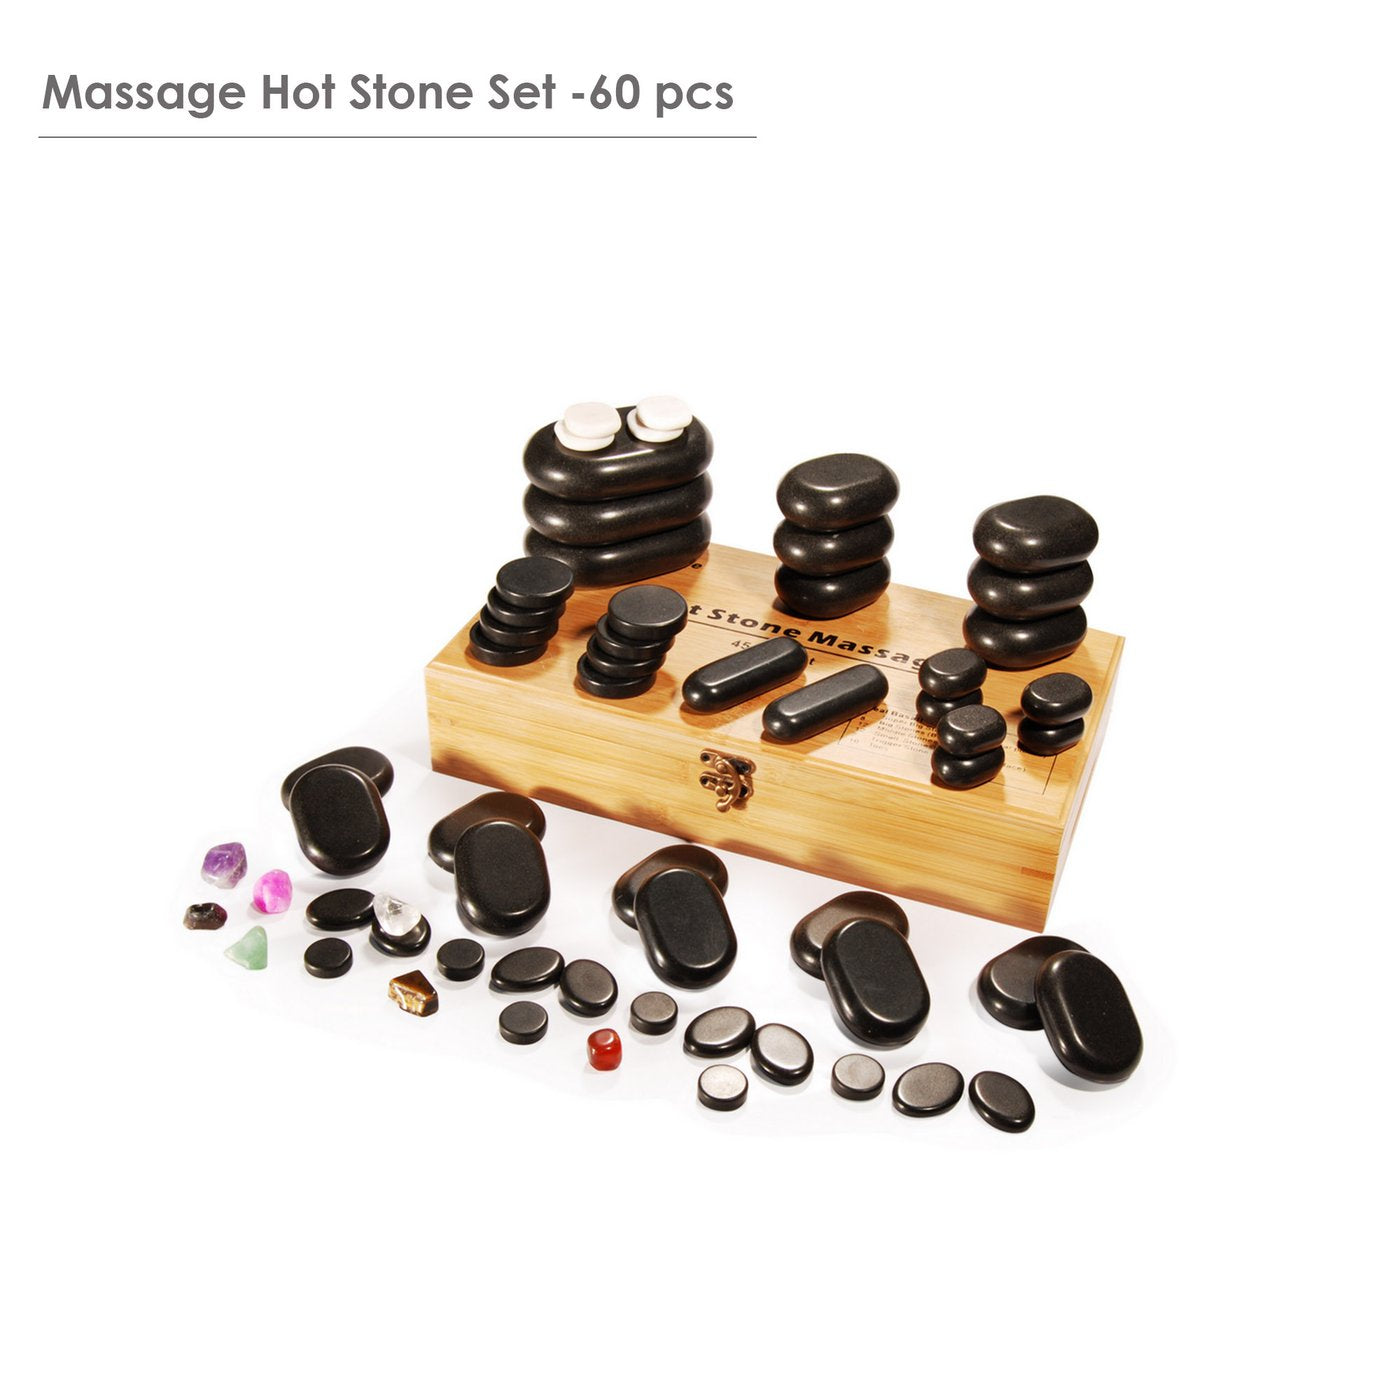 Deluxe Basalt Massage Hot Stone Set with Bamboo Box